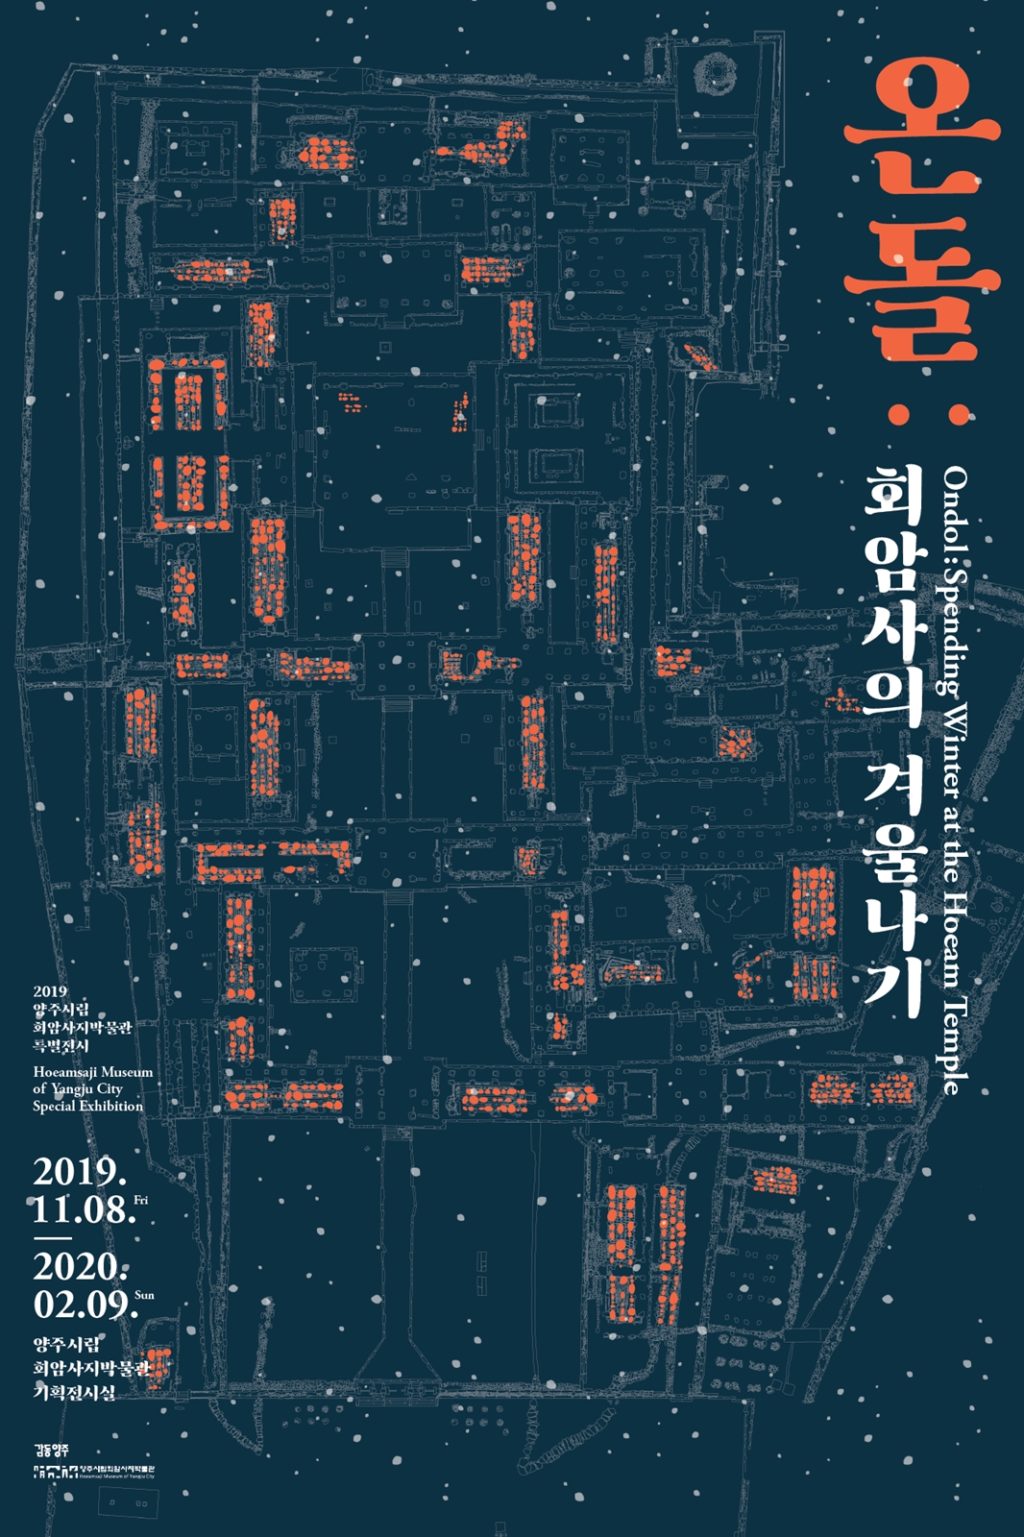 You are currently viewing 온돌 : 회암사의 겨울나기